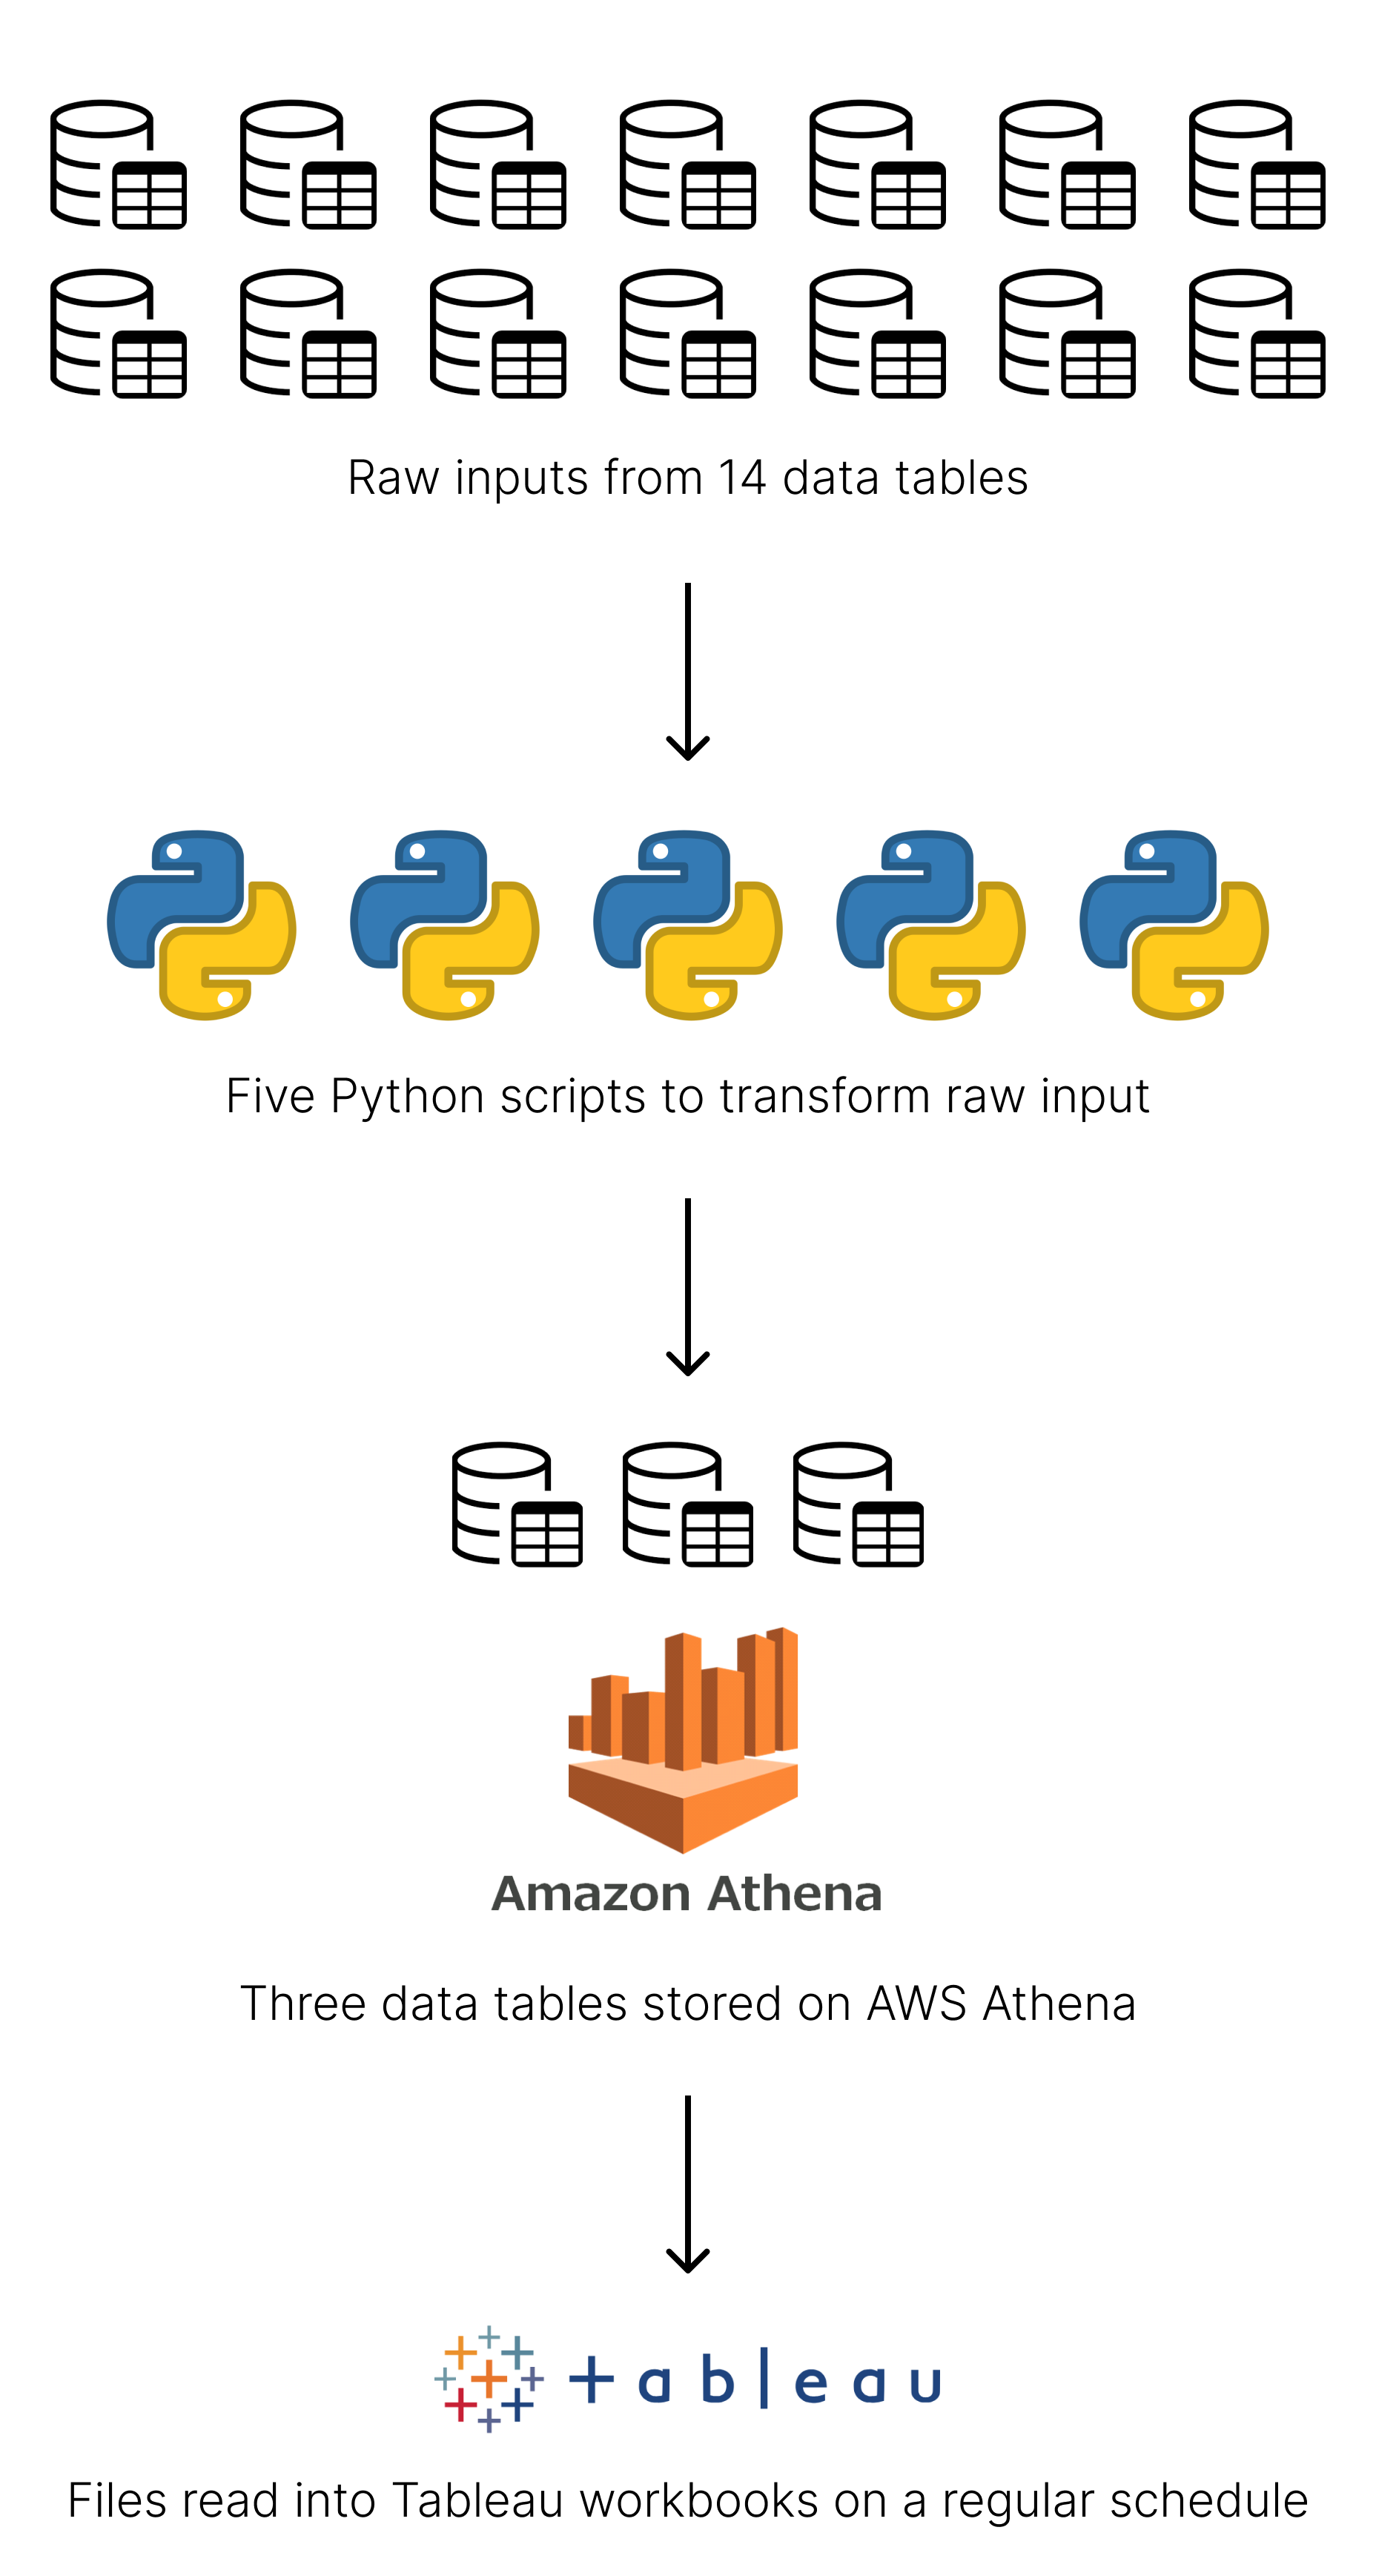 A diagram of 14 data files moving through five Python scripts to become three consolidated tables stored on AWS Athena, before being read into Tableau.